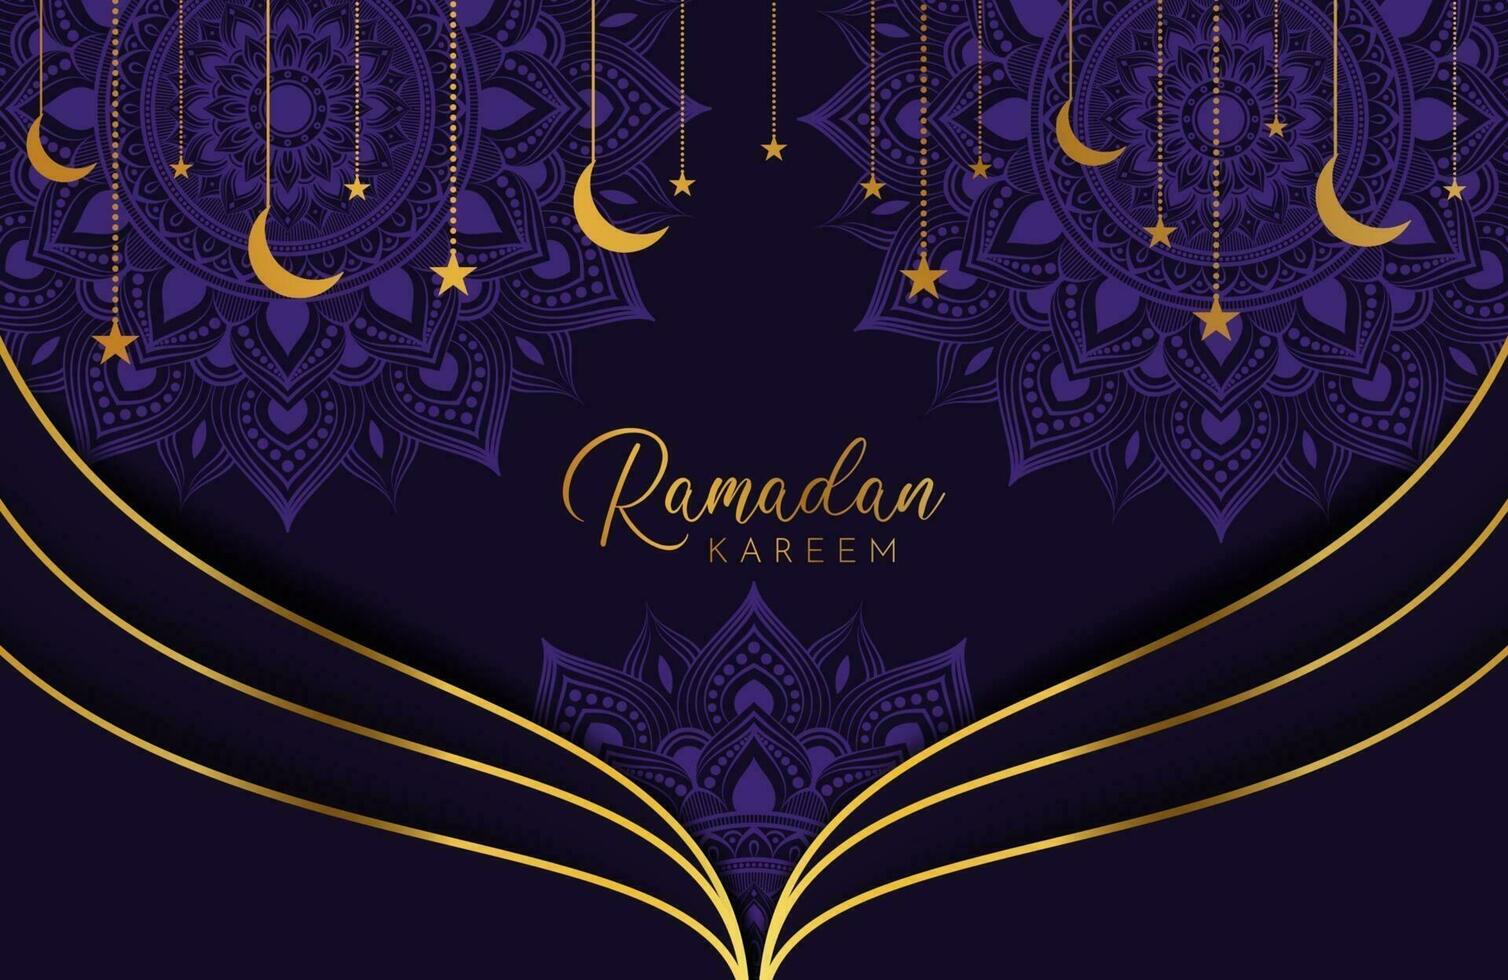 Ramadan kareem background with gold moon and stars on purple Vector illustration for Islamic holy month celebrations